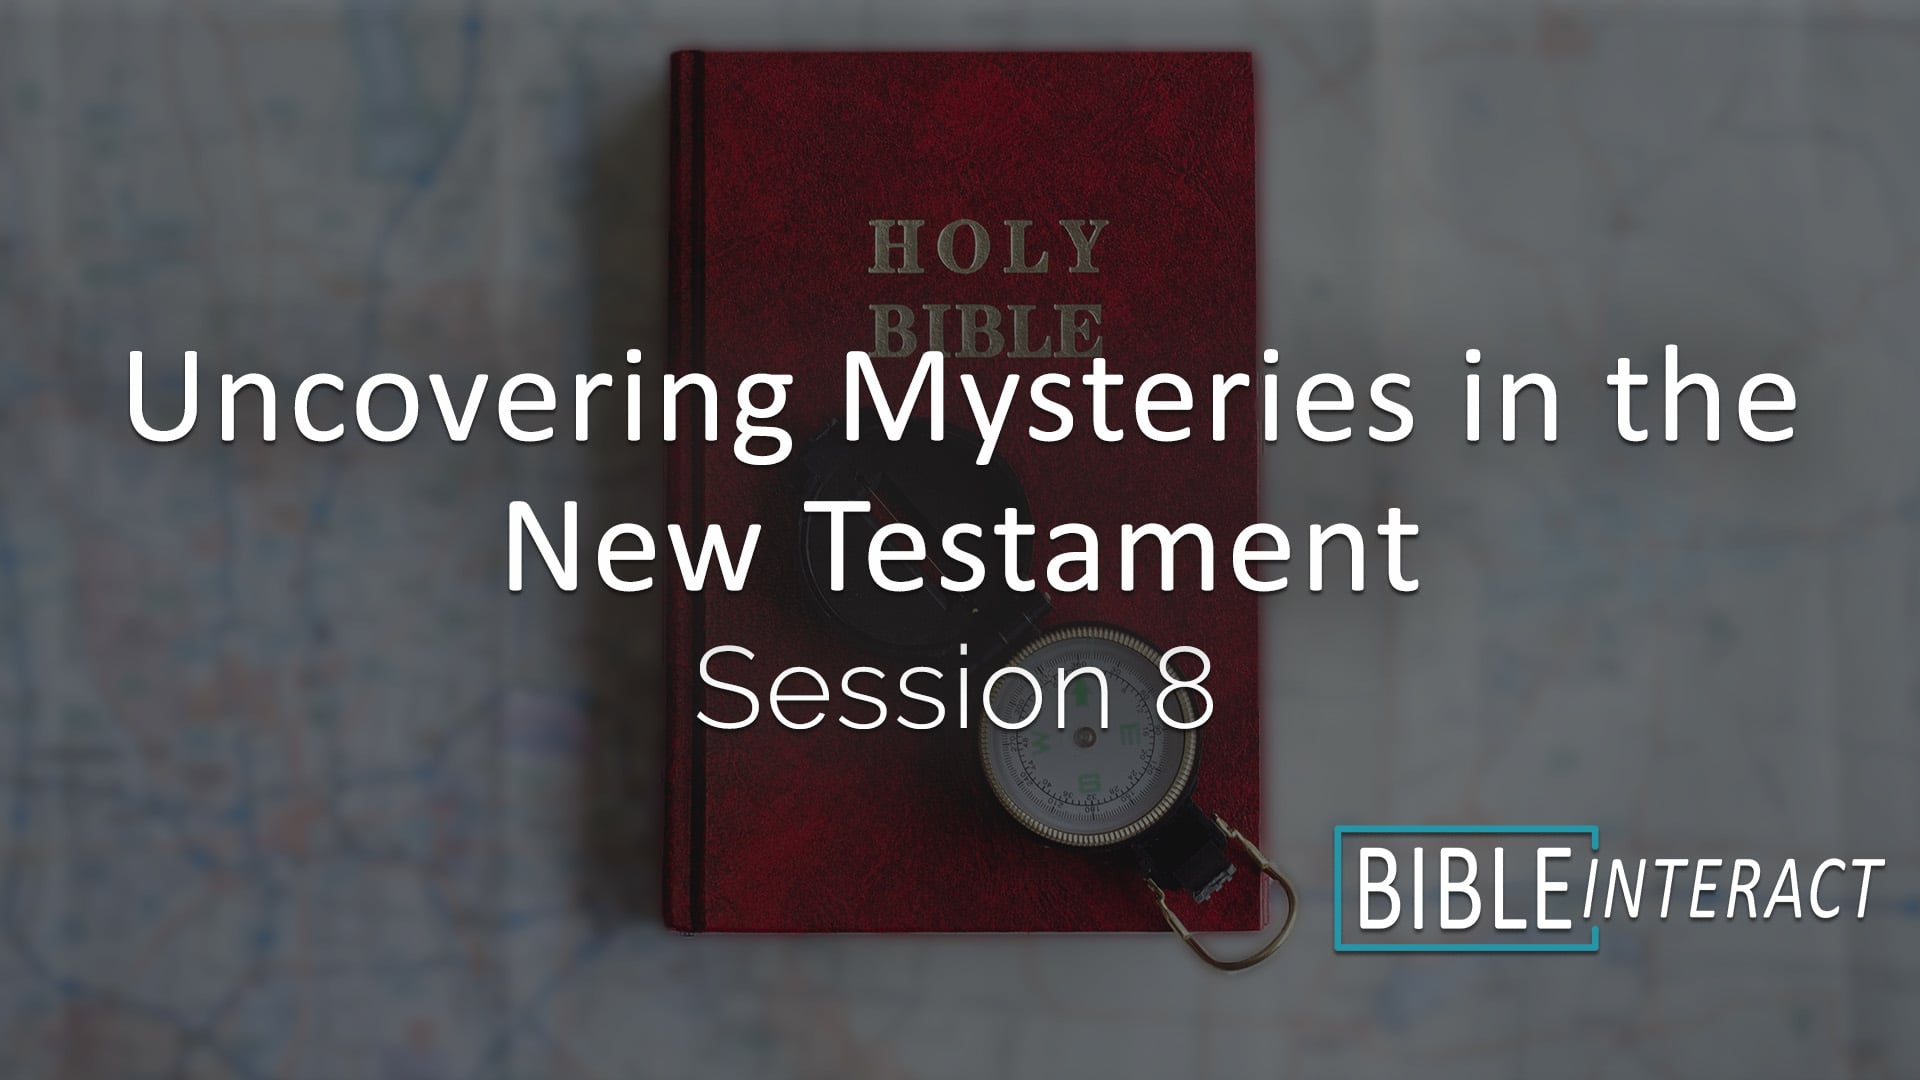 Uncovering Mysteries in the New Testament Session 8